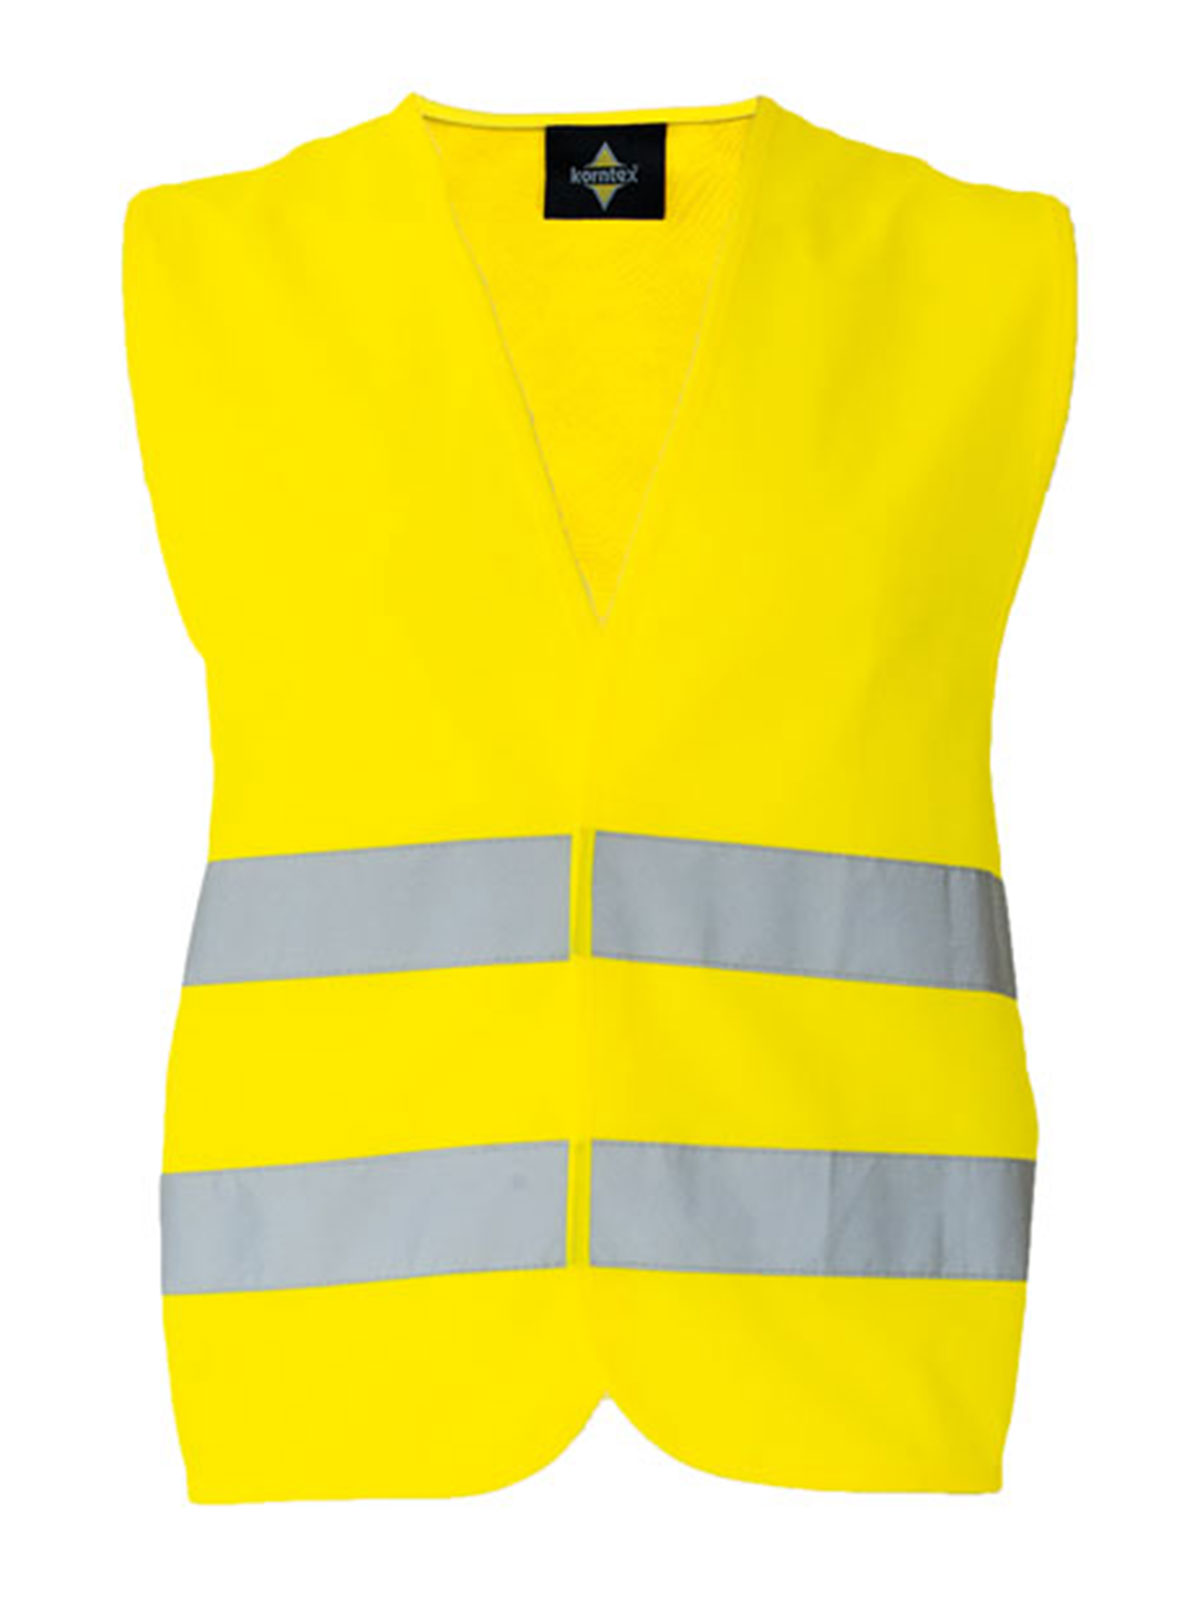 simple-safety-vest-yellow.webp